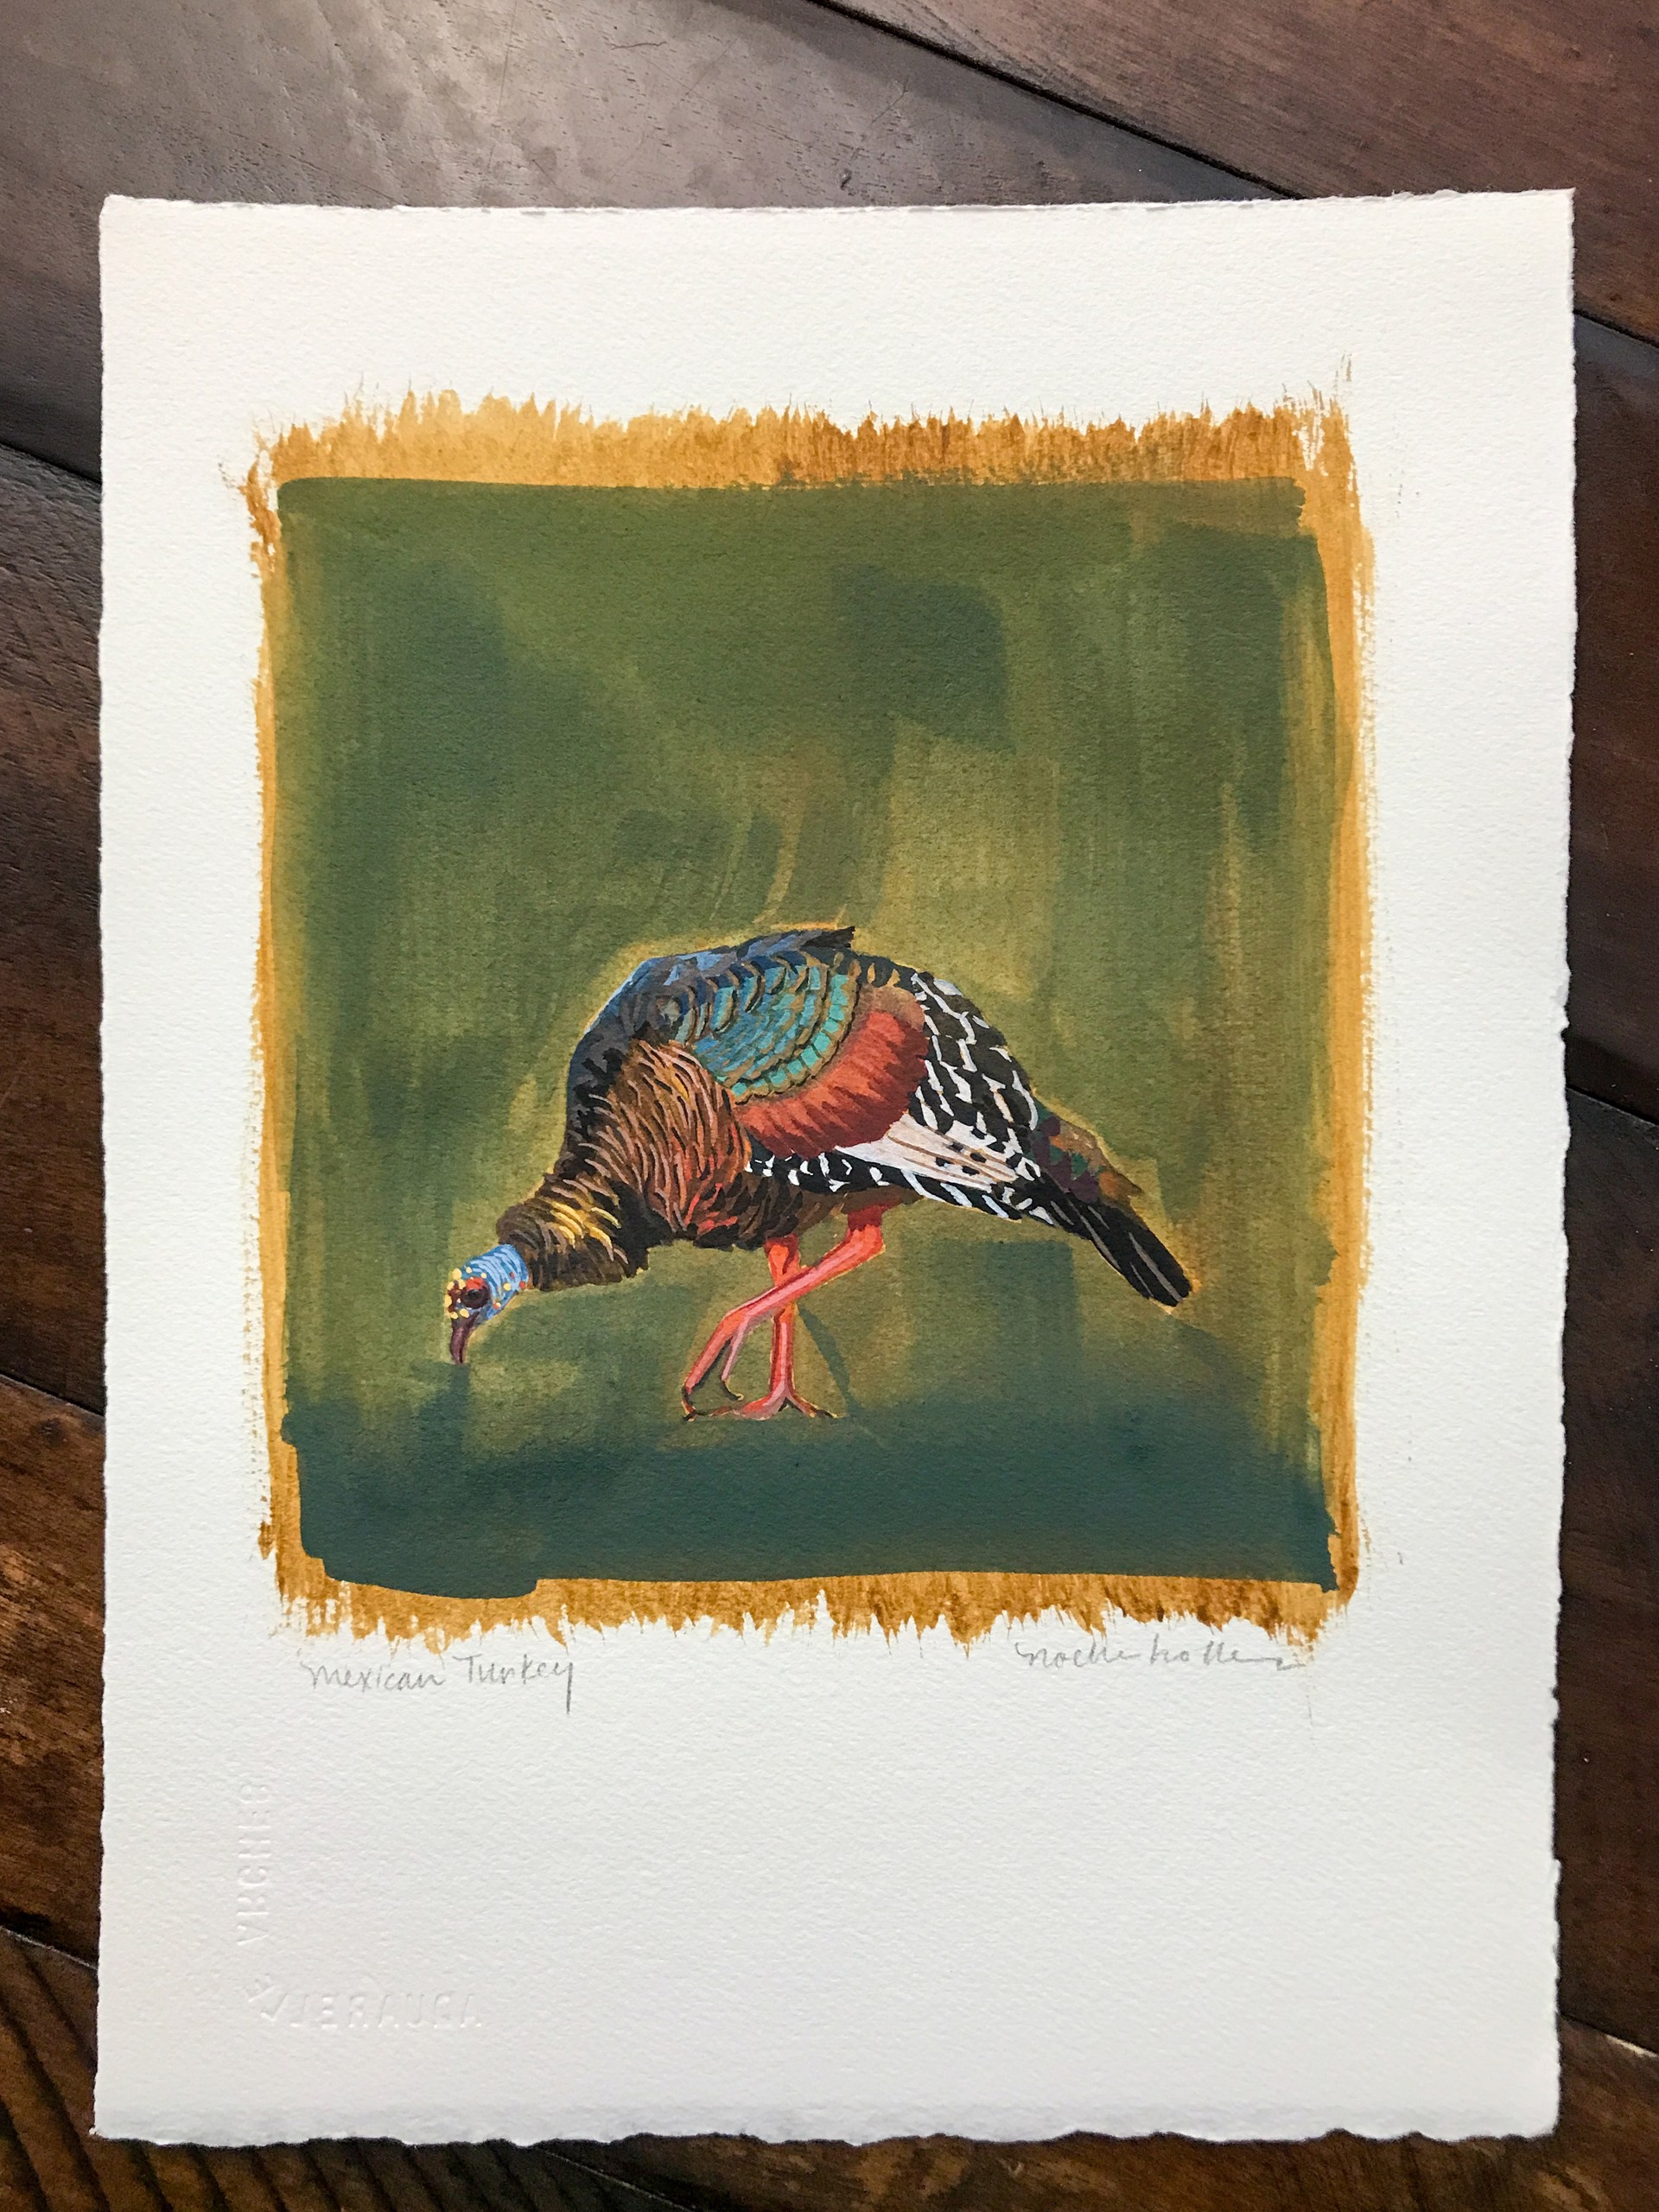 Mexican Turkey by Noelle Holler